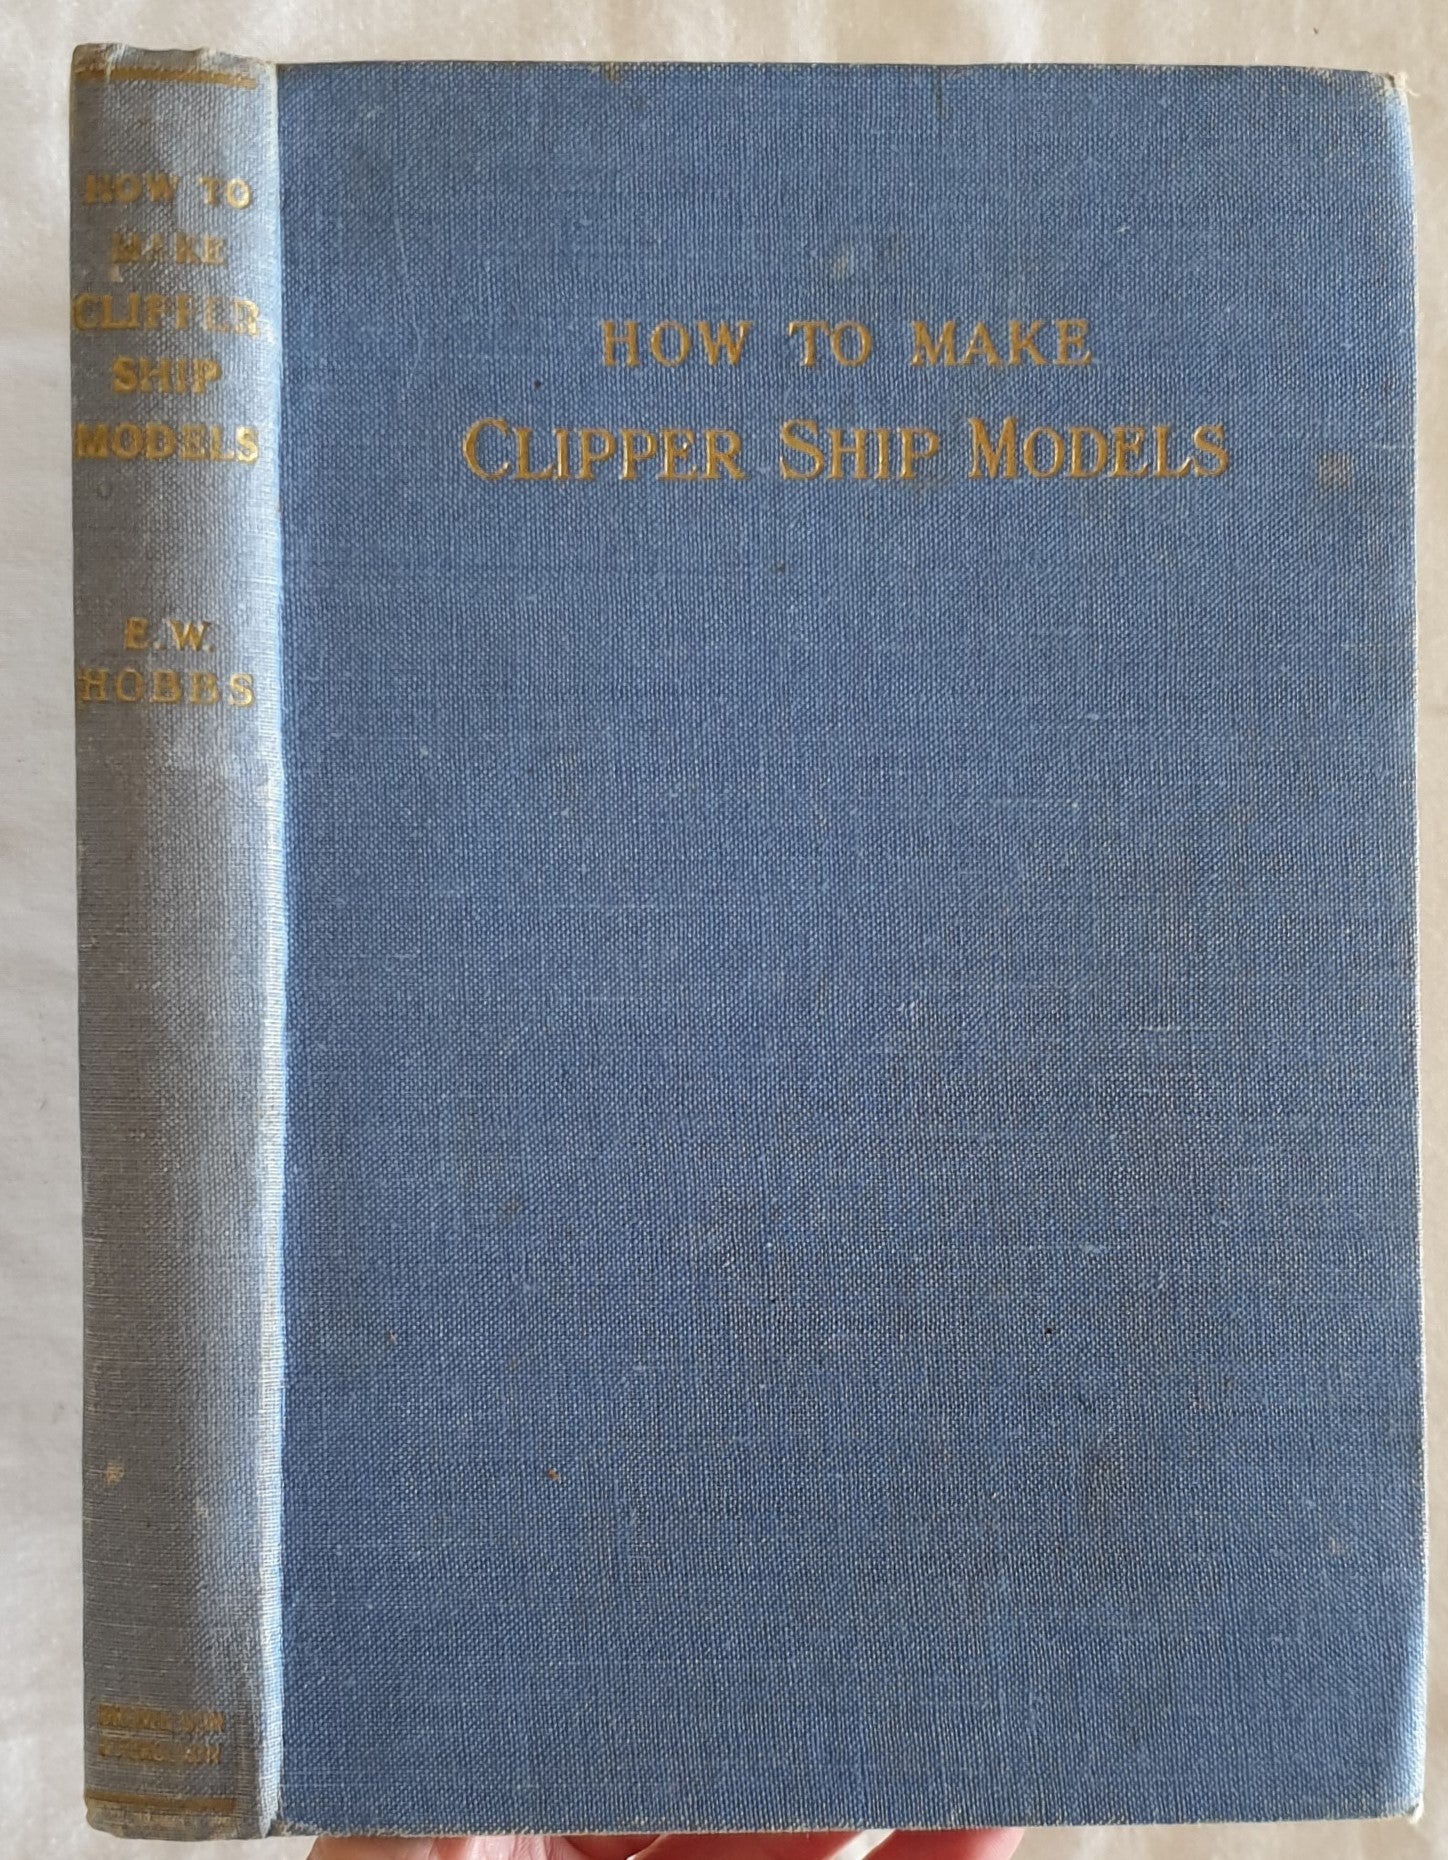 How To Make Clipper Ship Models by Edward W. Hobbs